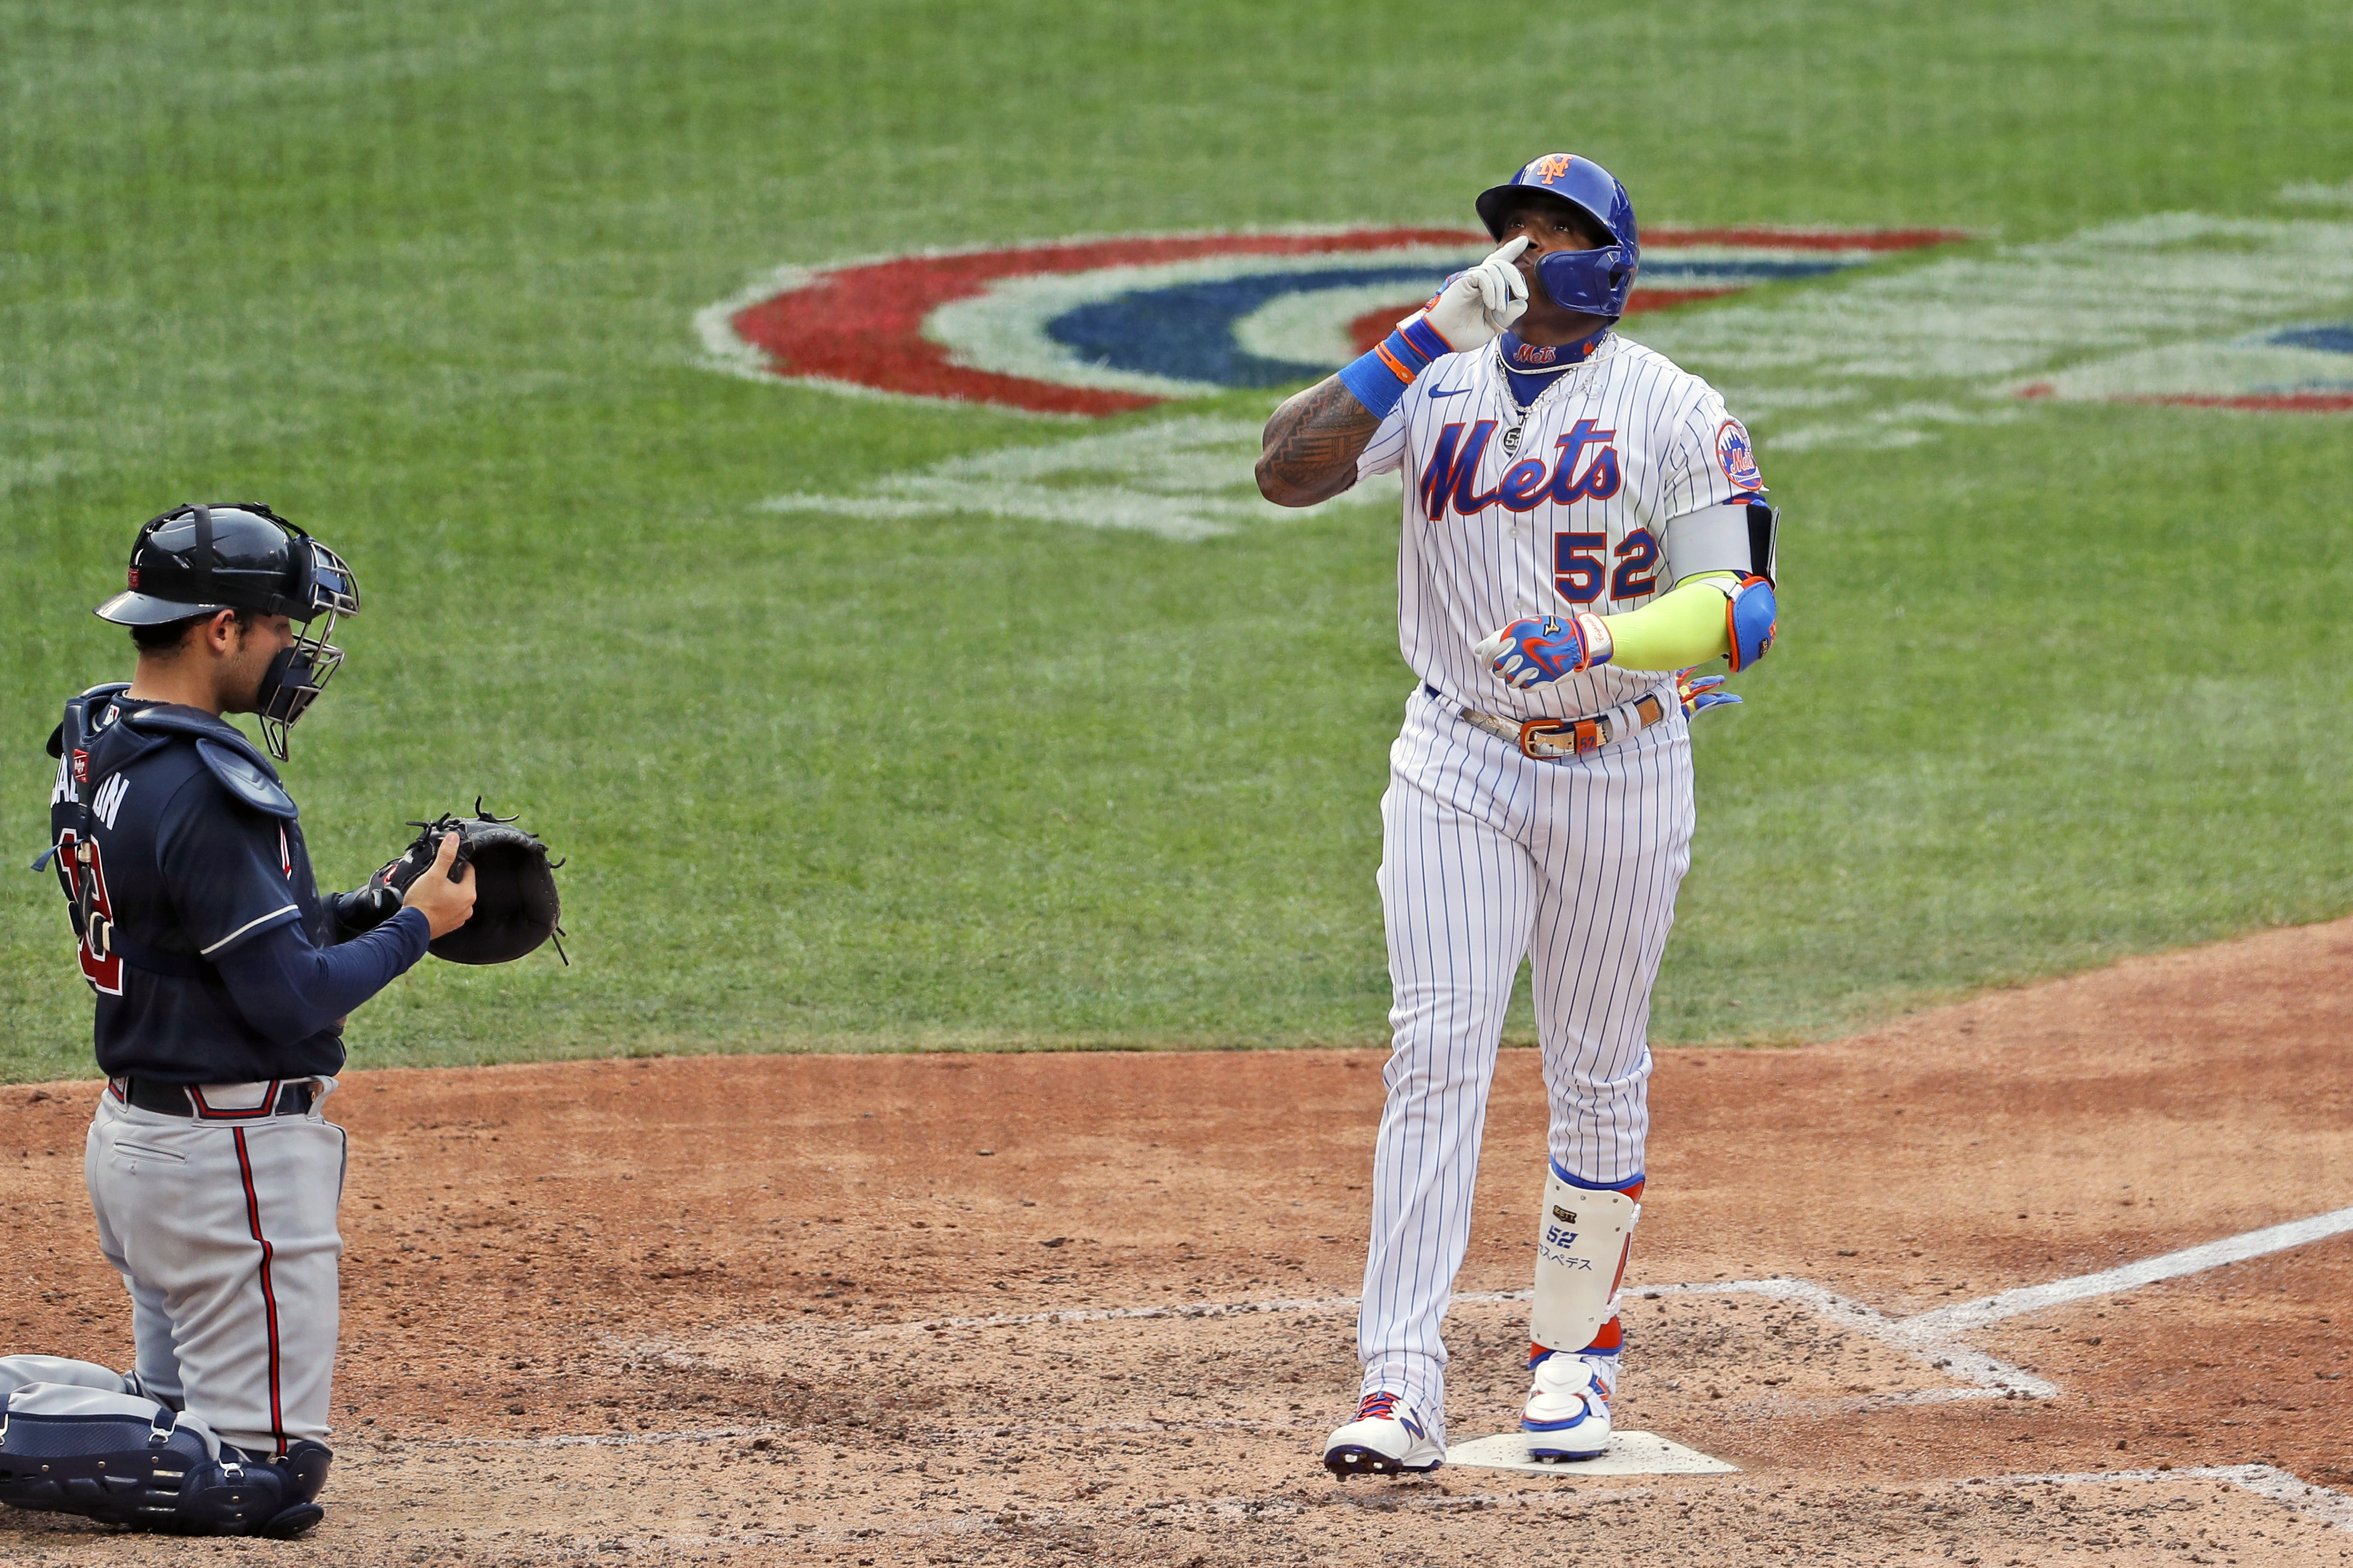 Time for Mets to prove they can keep Yoenis Cespedes healthy and